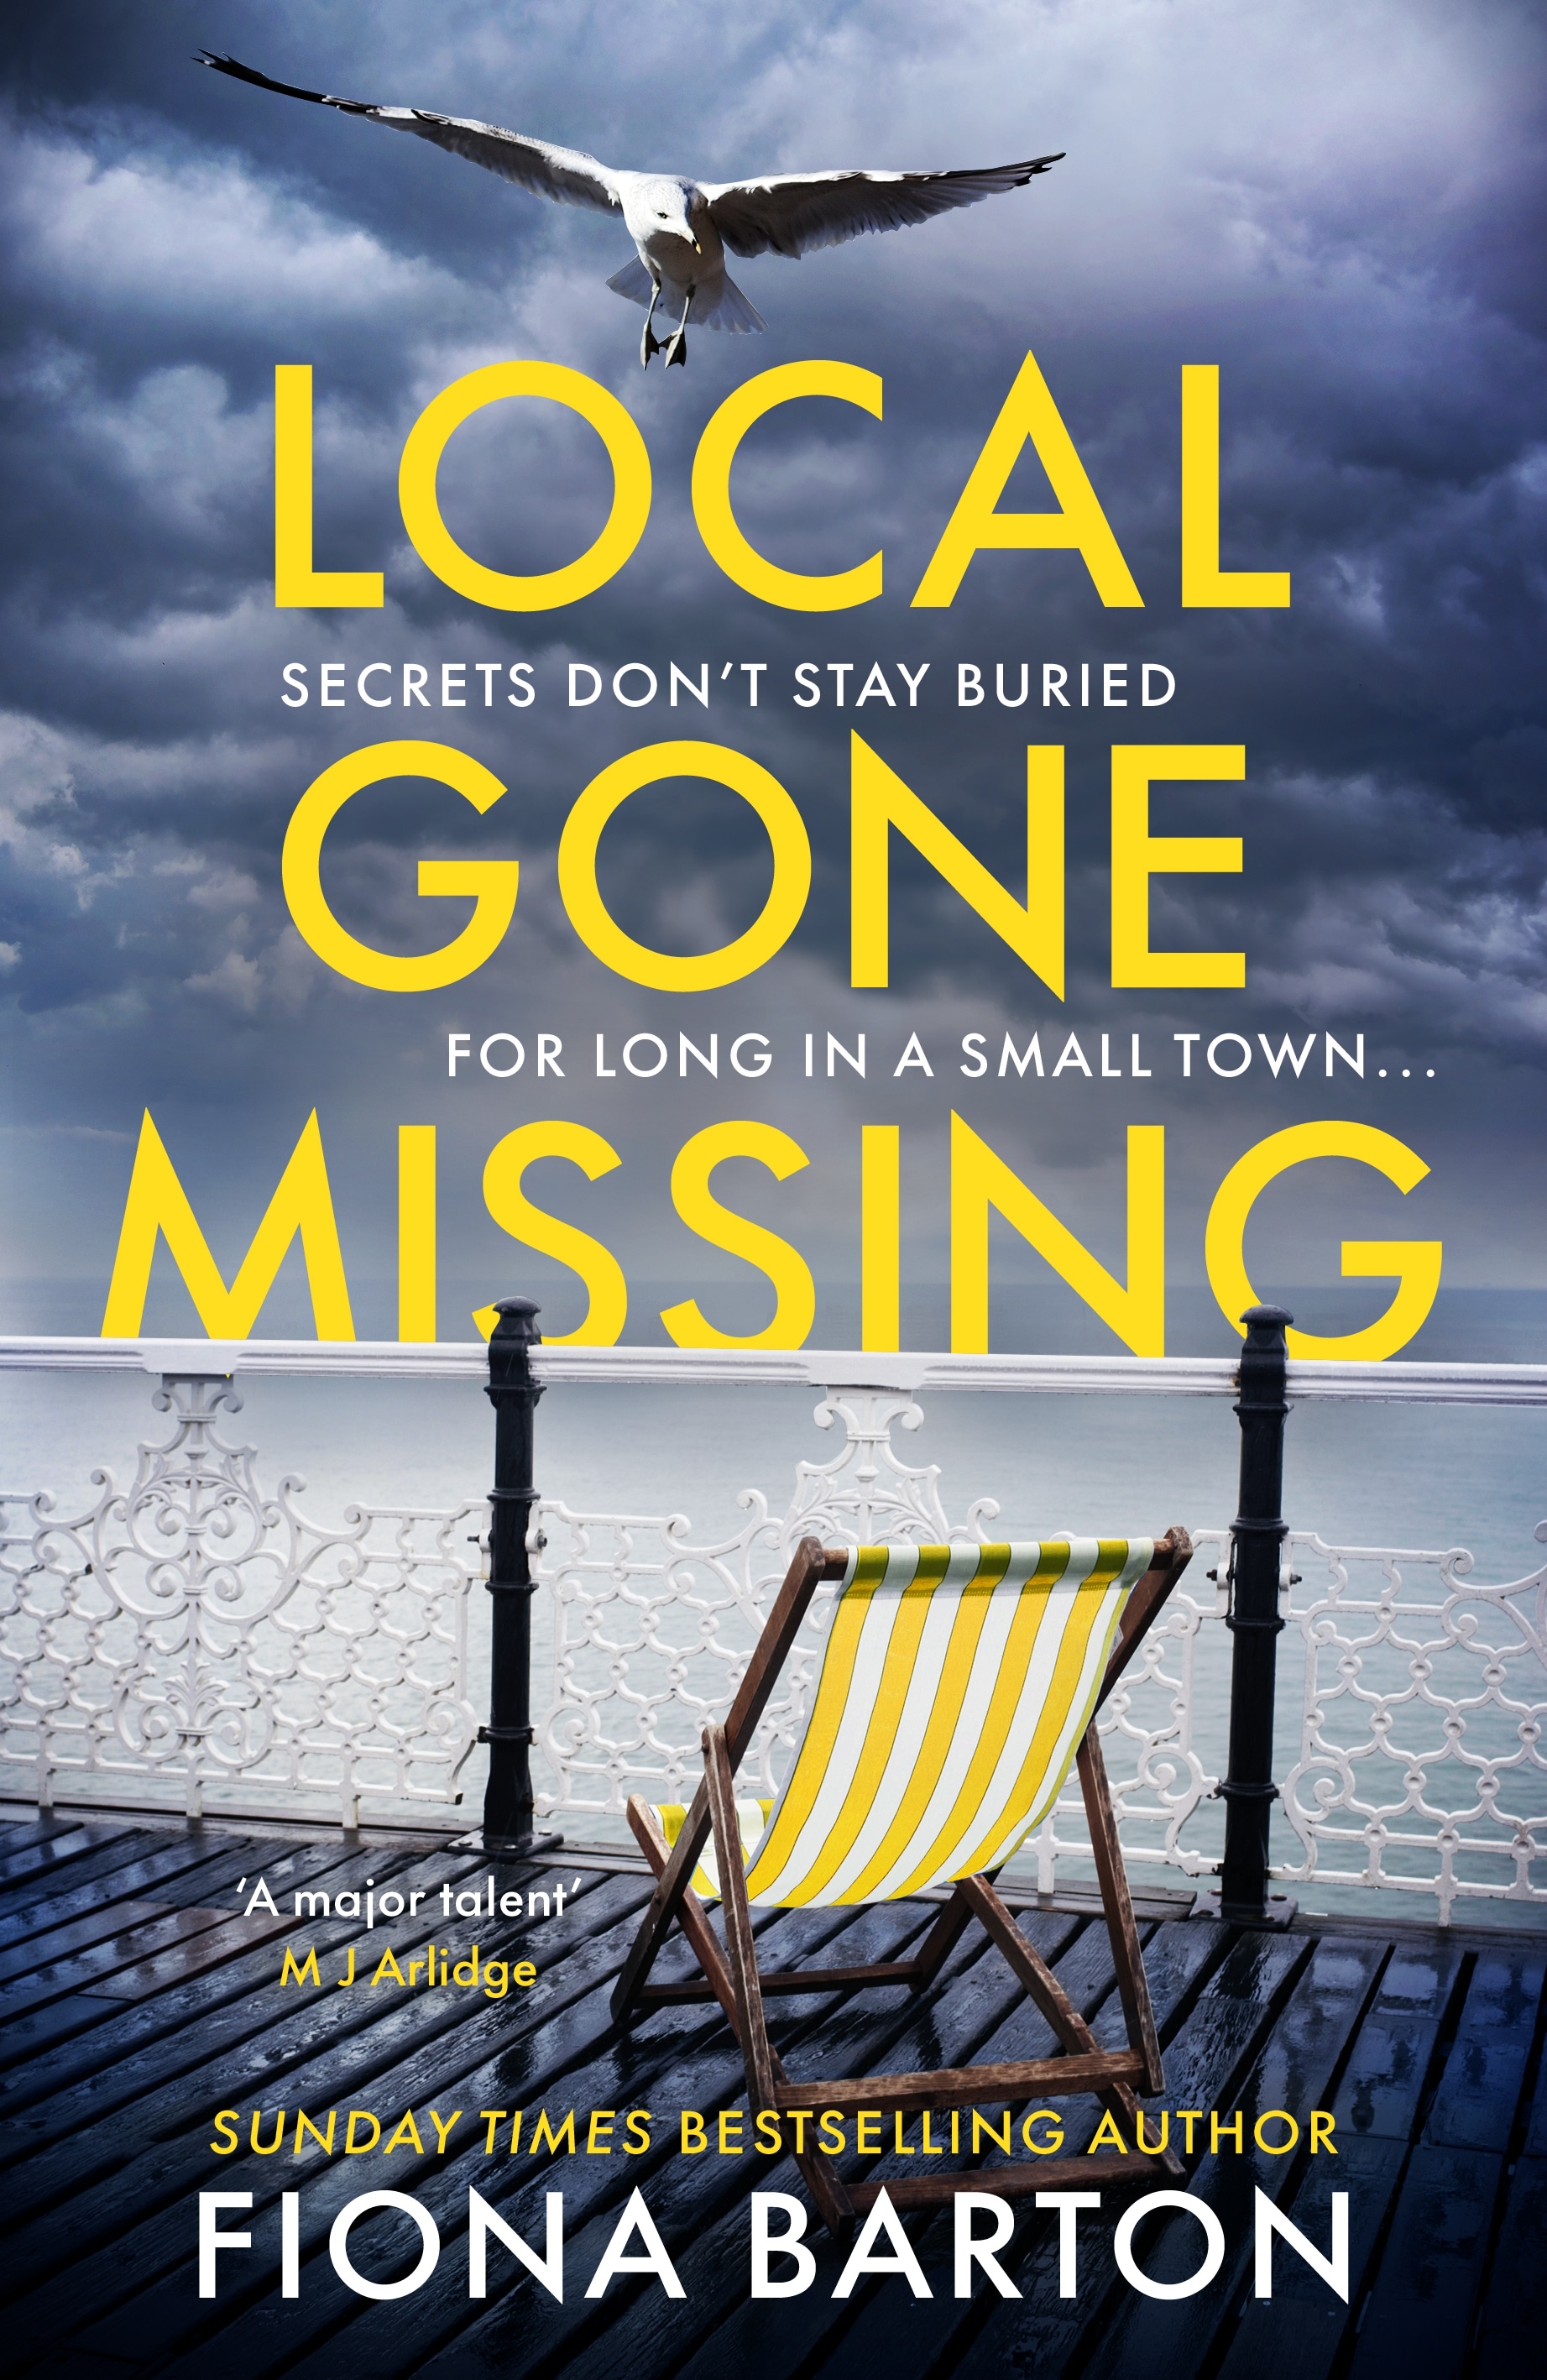 Book “Local Gone Missing” by Fiona Barton — June 9, 2022